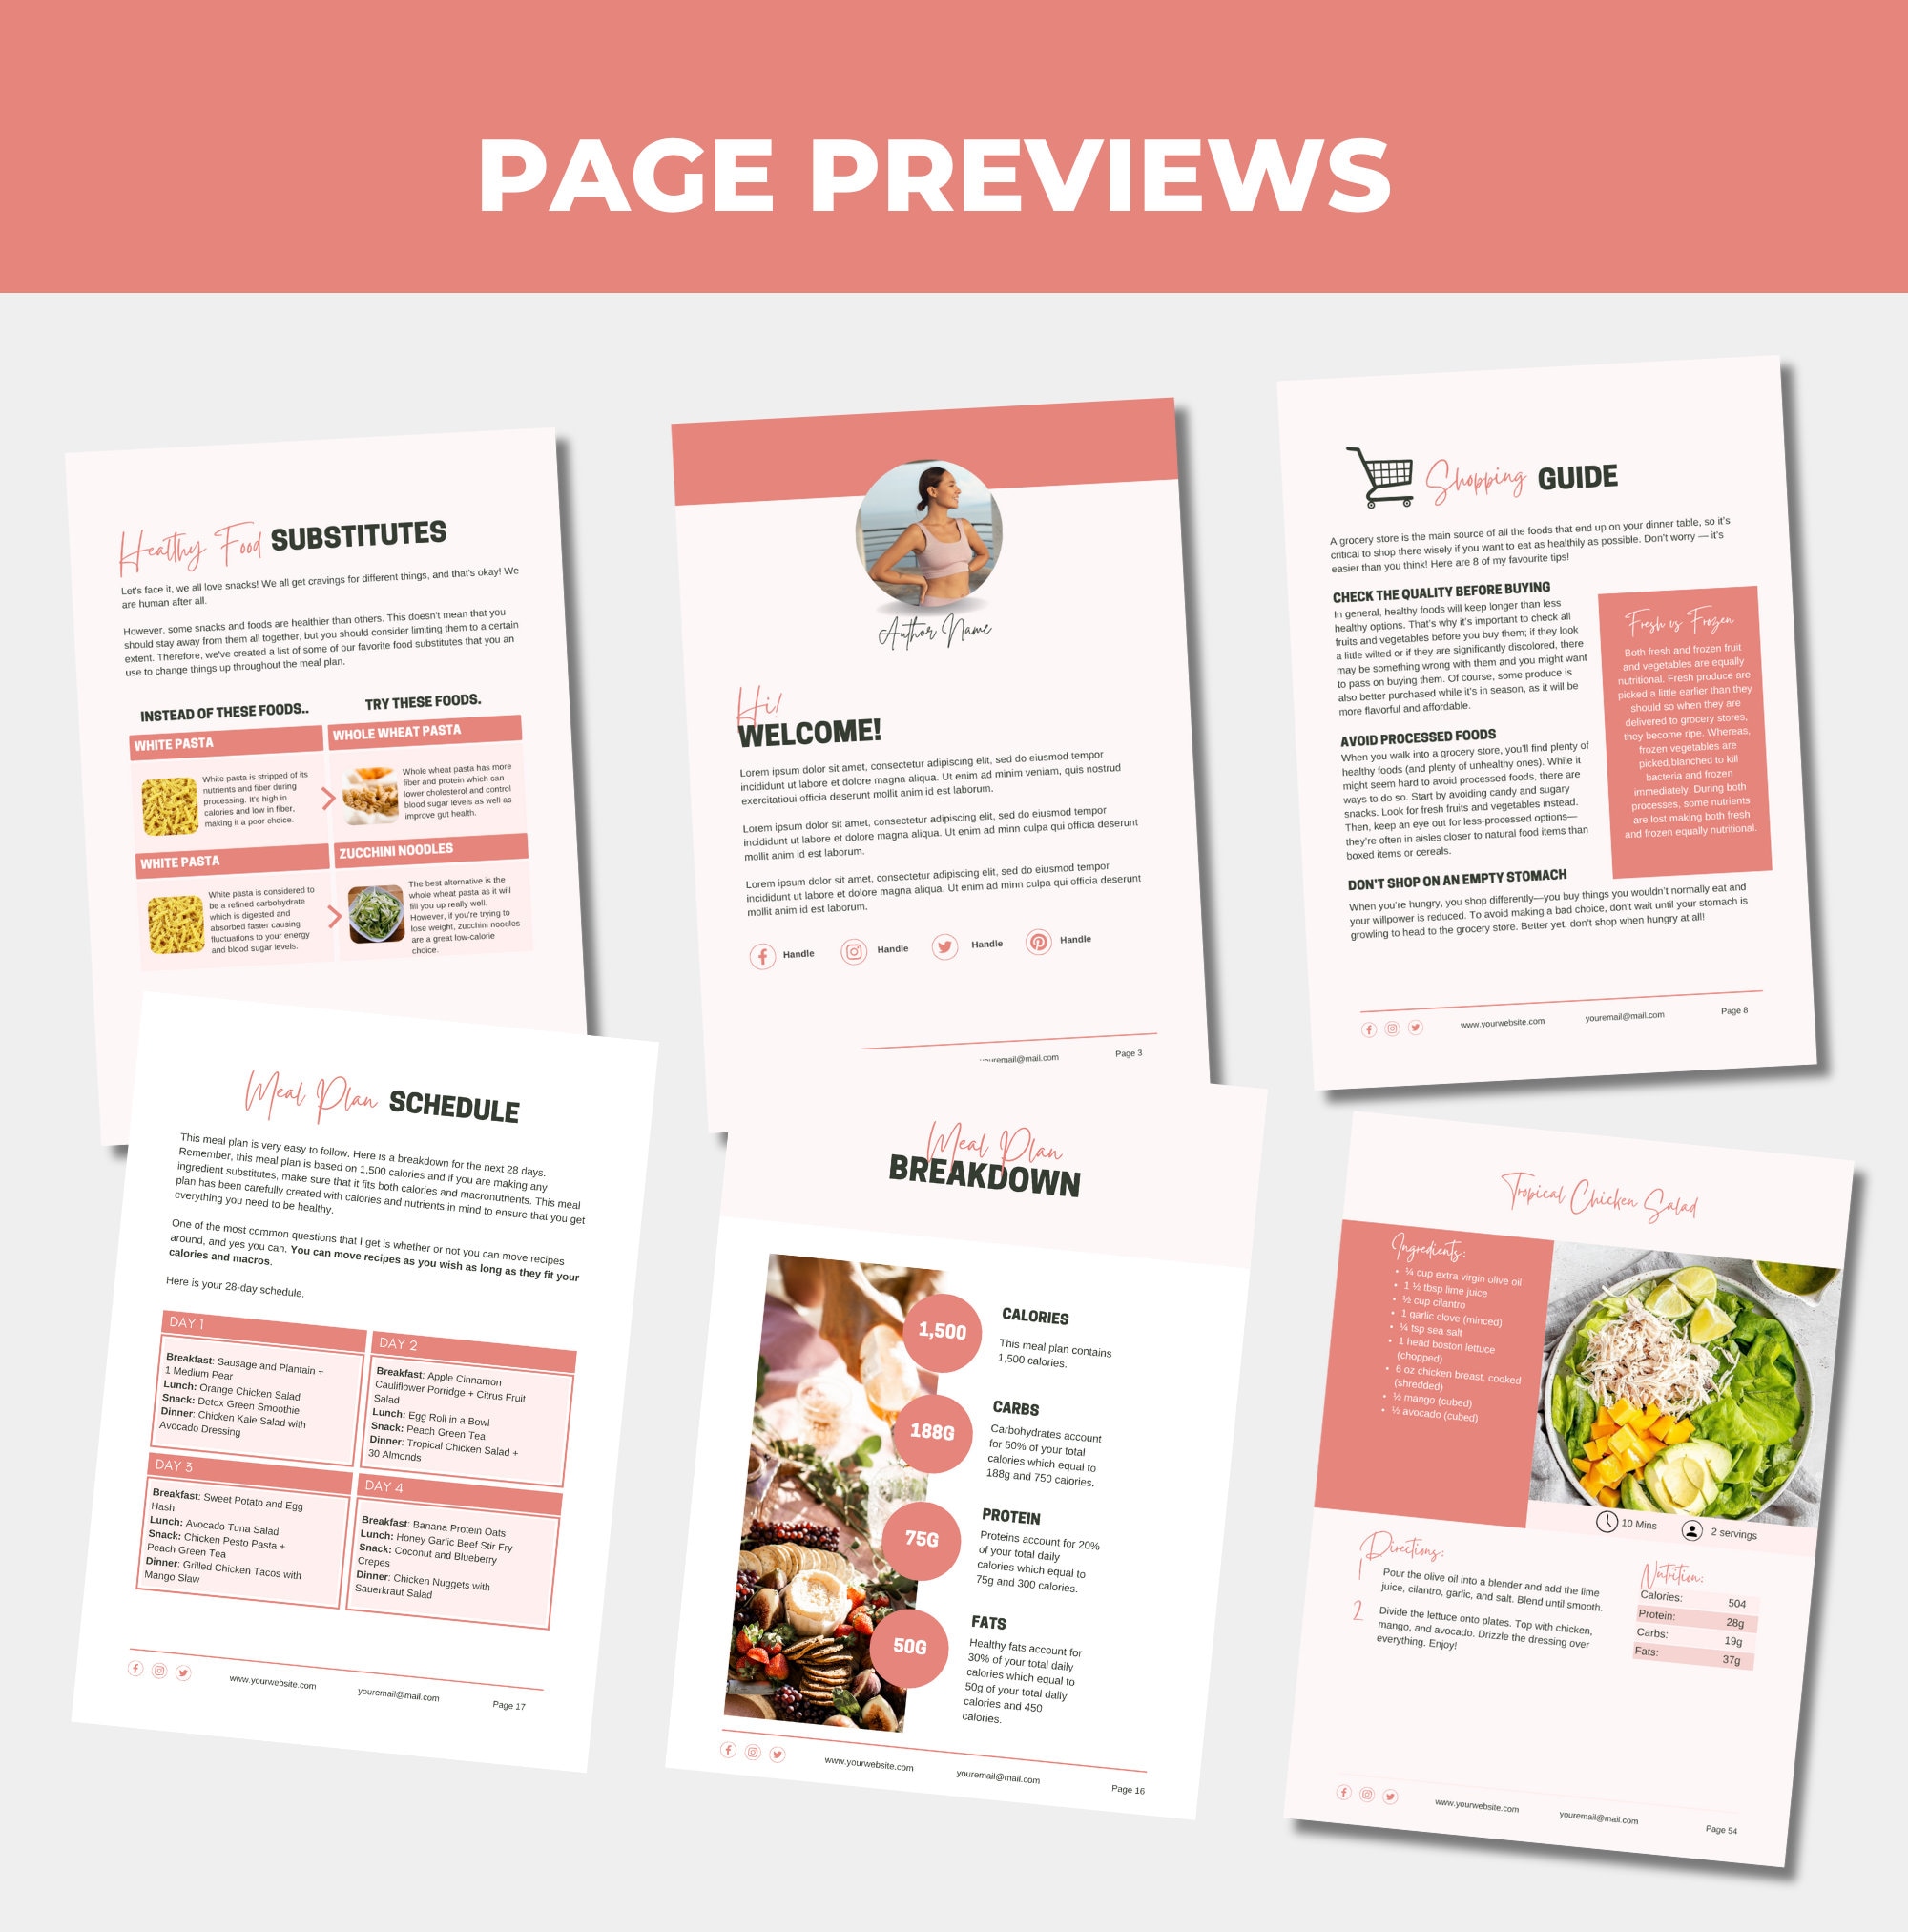 28-day Meal Plan Template With Healthy Recipes 1500 Calories - Etsy